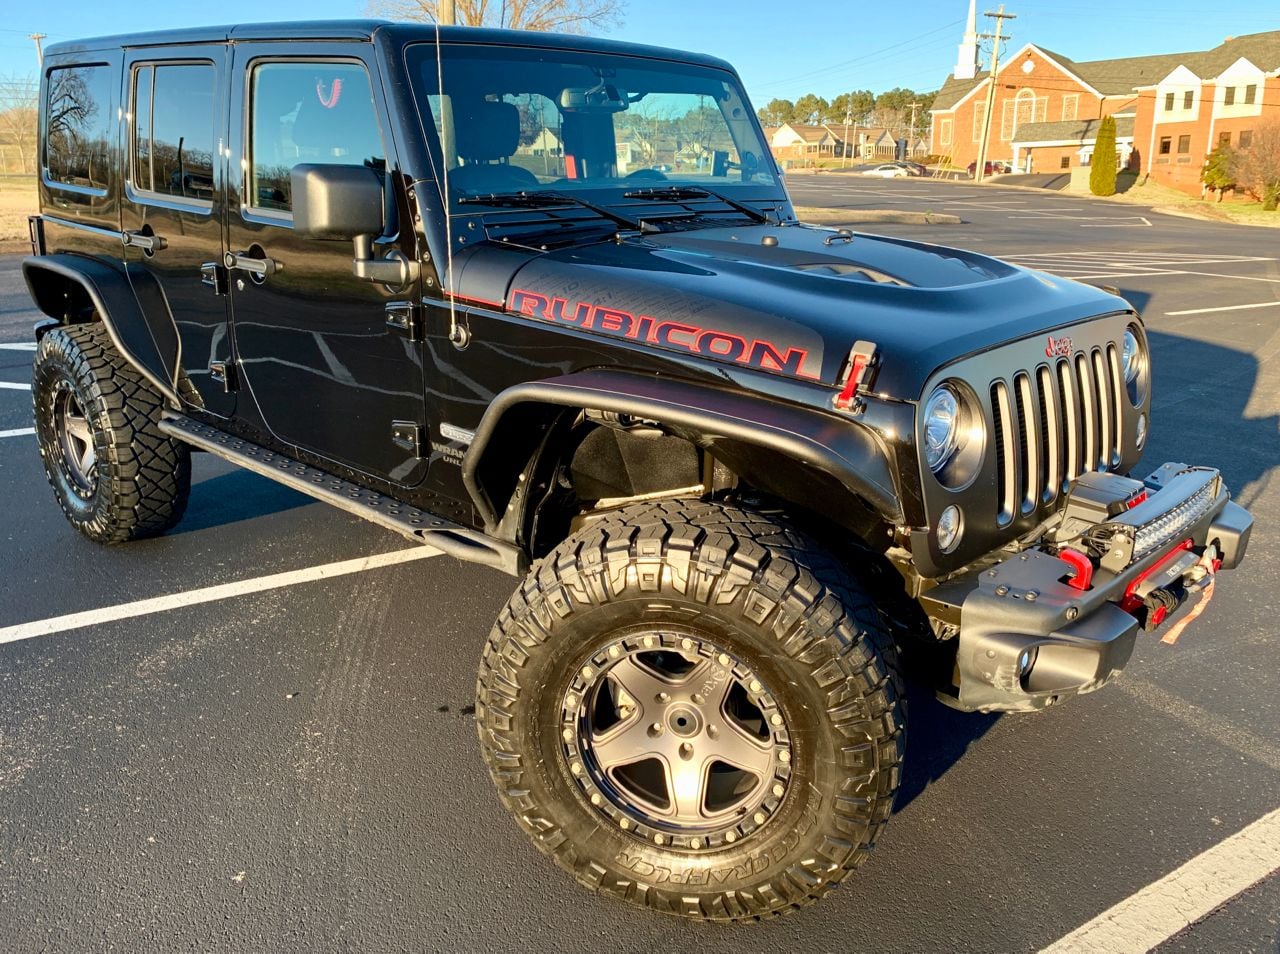 2017 Jeep Wrangler - 2017 Jeep Wrangler Rubicon Recon with $12K+ in Mods - Used - VIN 1C4BJWFG9HL715091 - 26,000 Miles - 6 cyl - 4WD - Automatic - SUV - Black - Maryville, TN 37804, United States